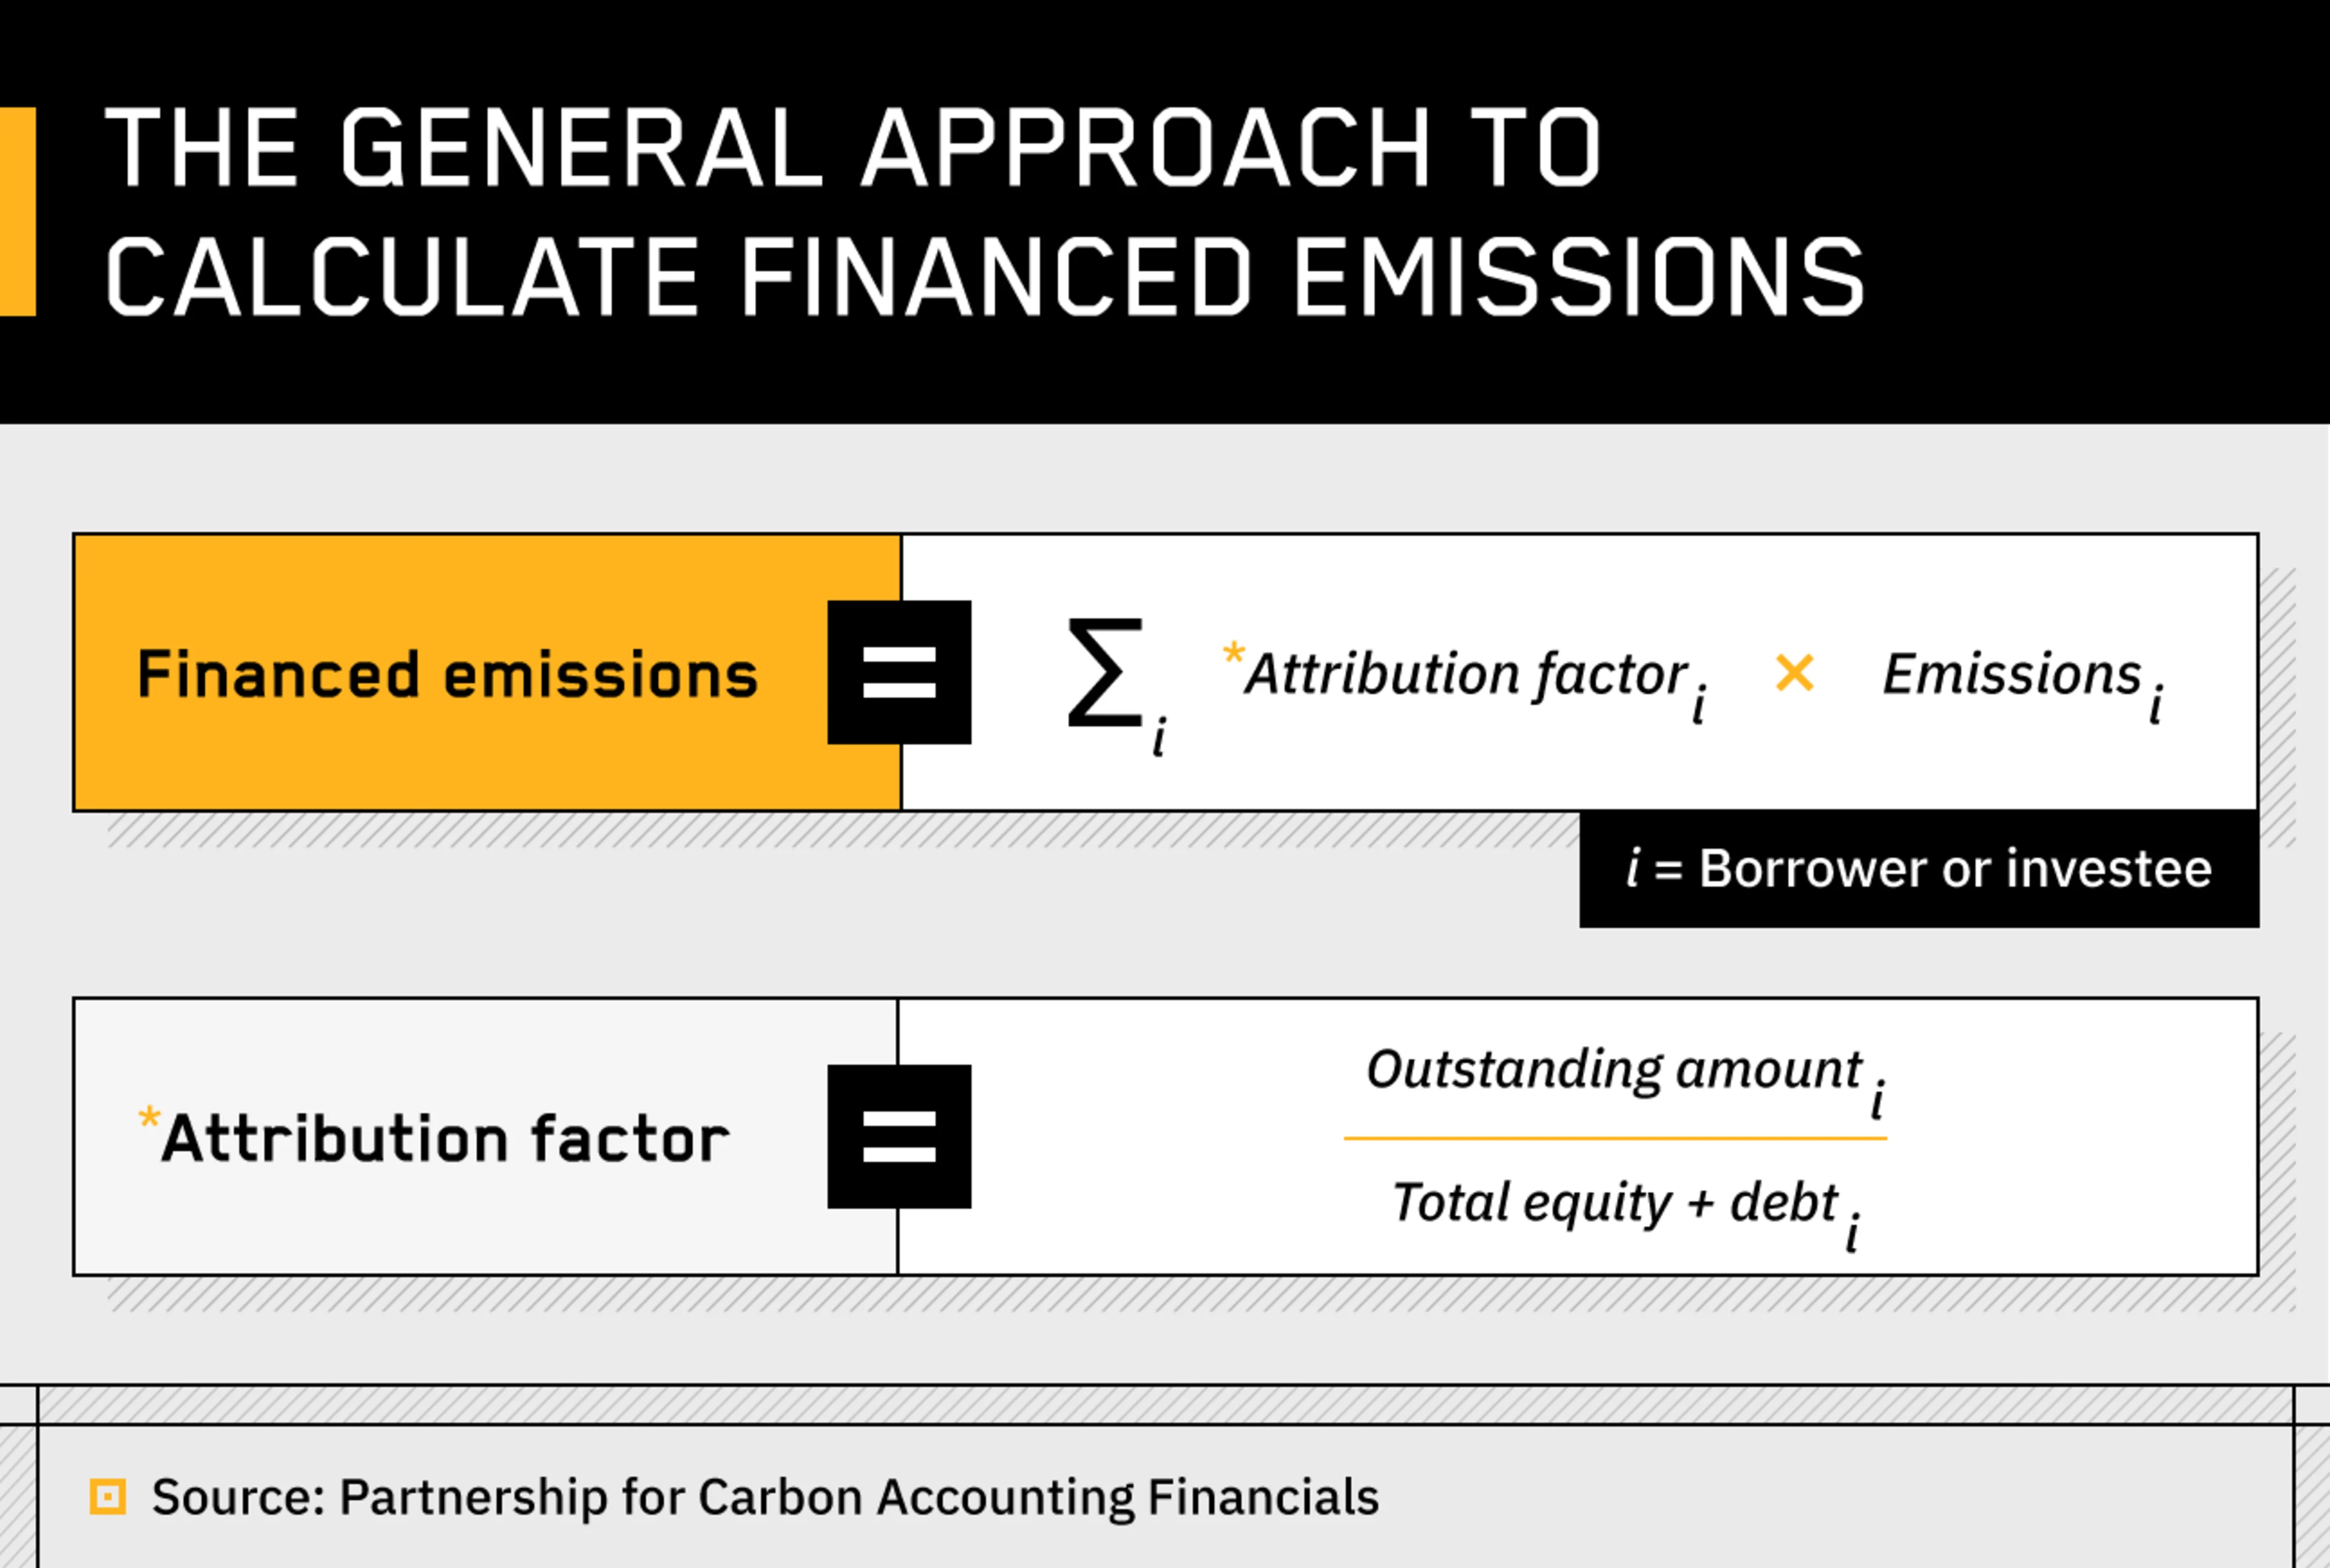 How to Approach Financed Emissions Calculations